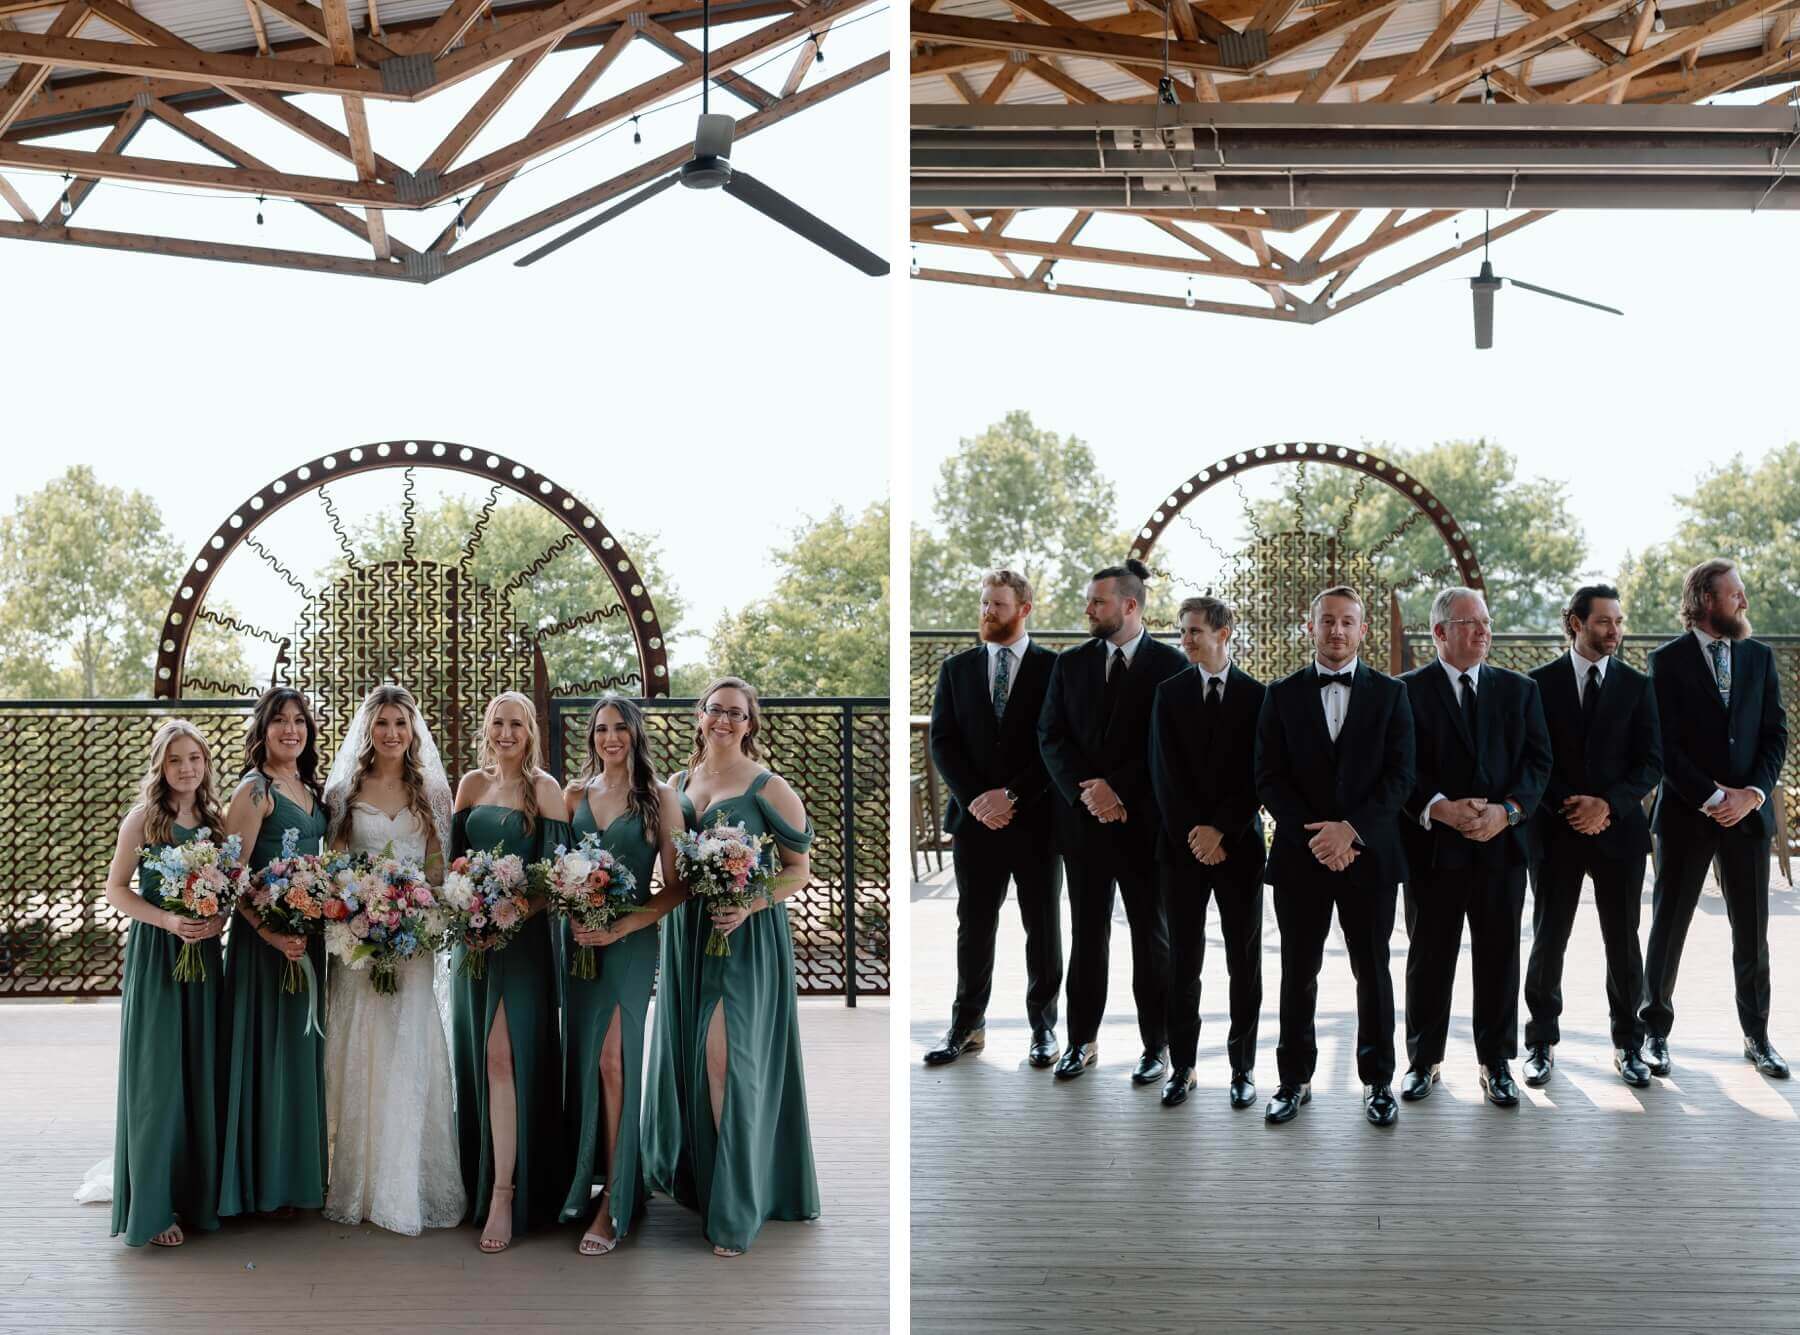 Bride with bridesmaids in sage green dresses and groom with groomsmen in black suits